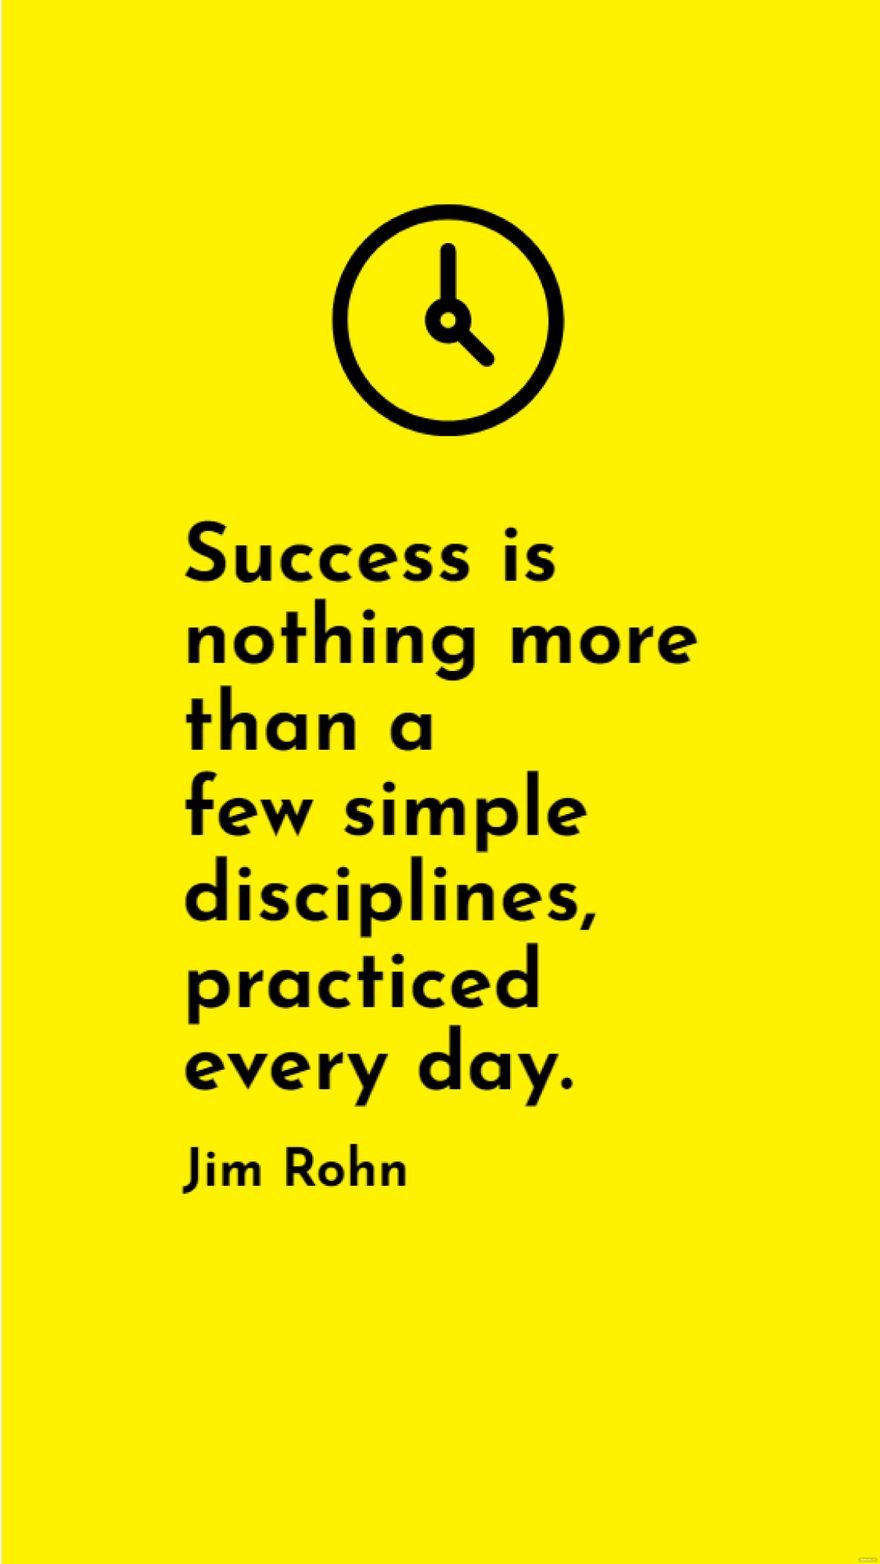 Free Jim Rohn - Success is nothing more than a few simple disciplines, practiced every day. in JPG